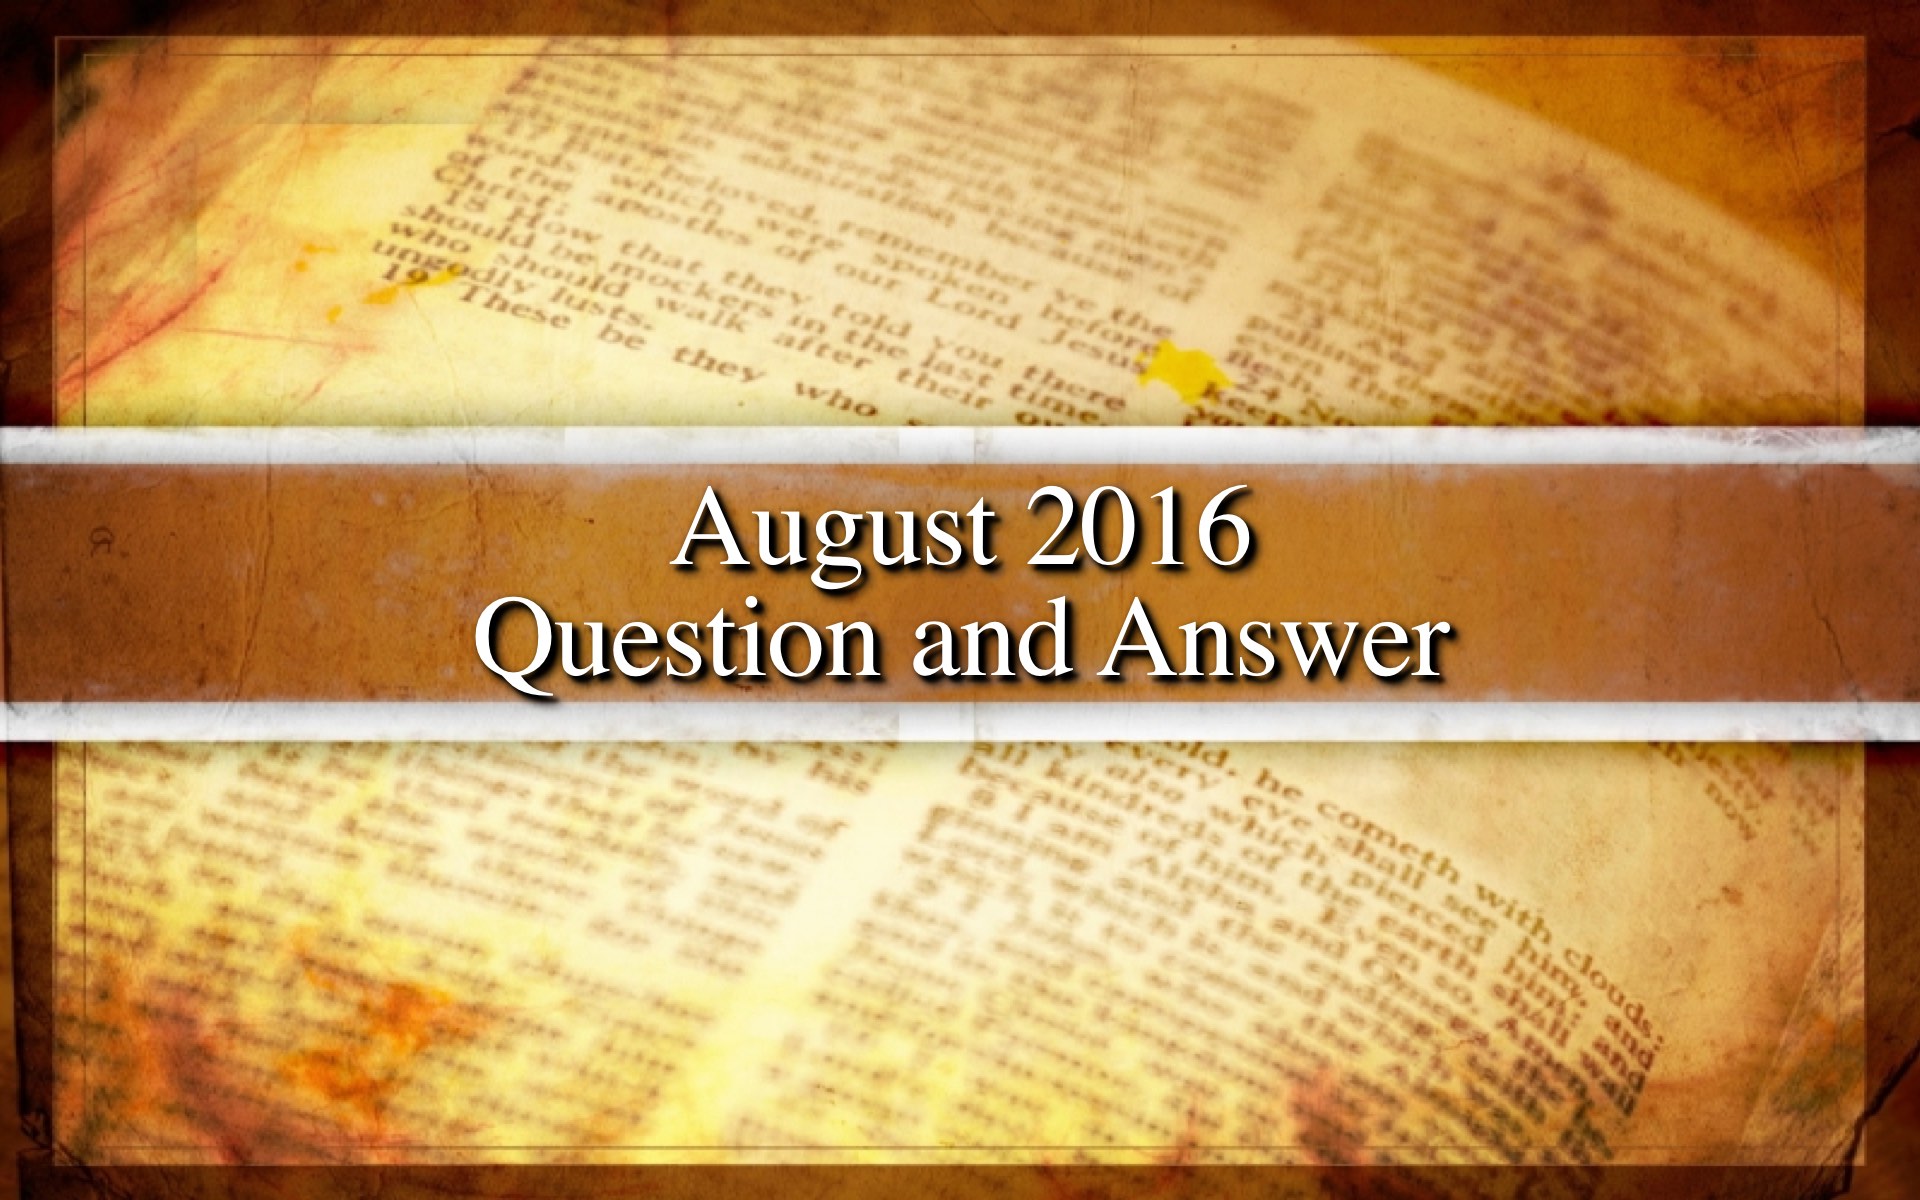 August 2016 Question and Answer